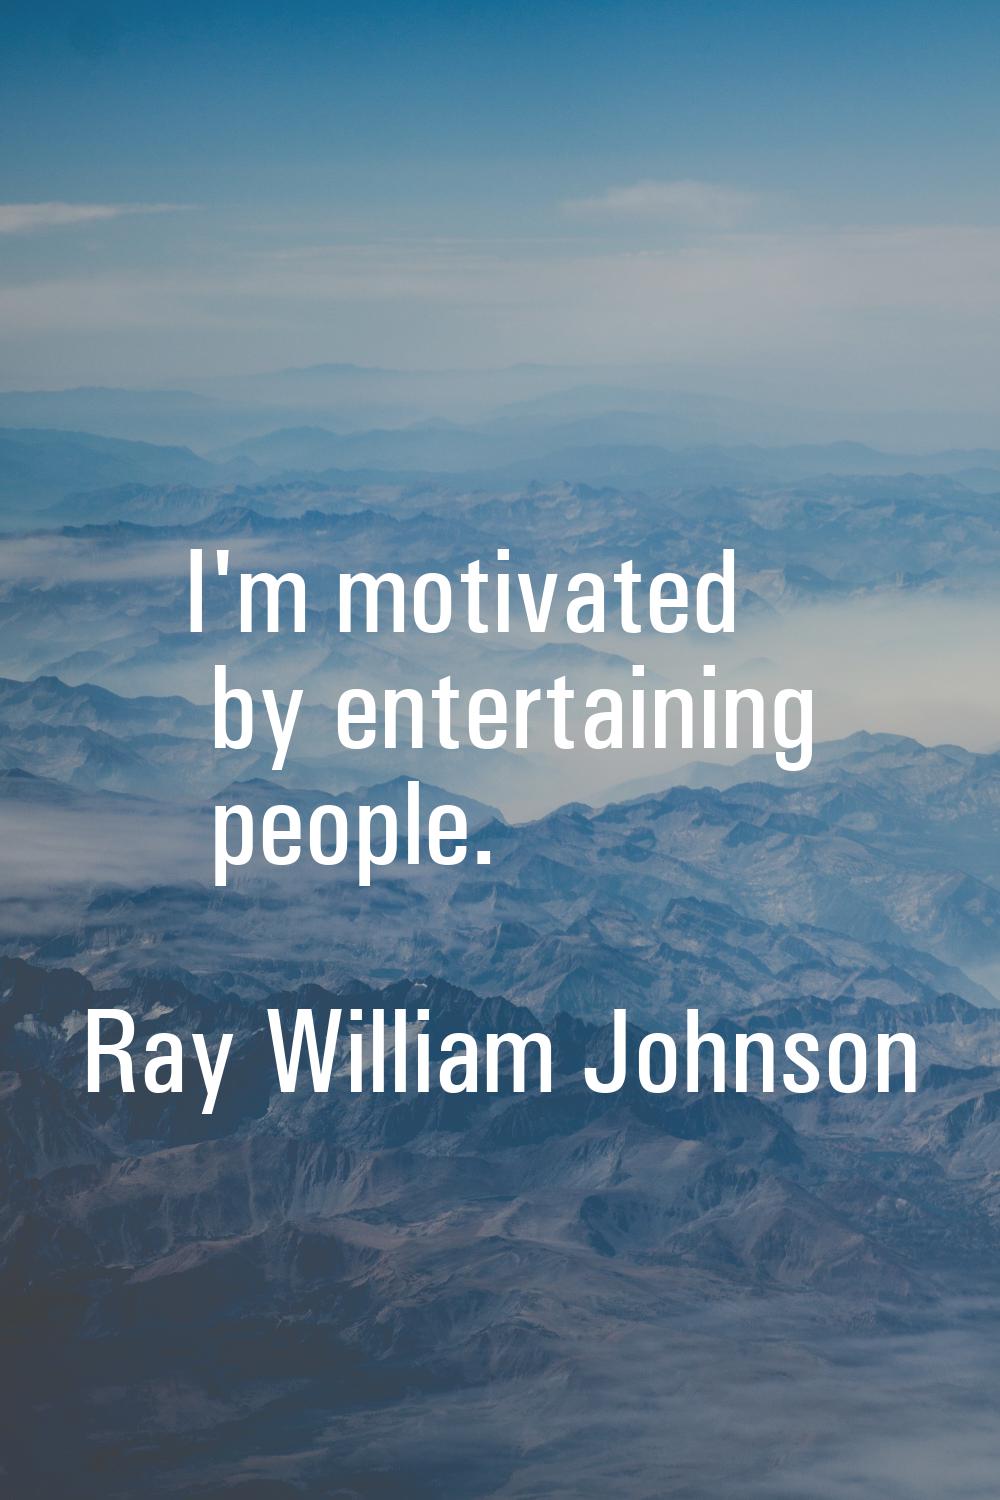 I'm motivated by entertaining people.